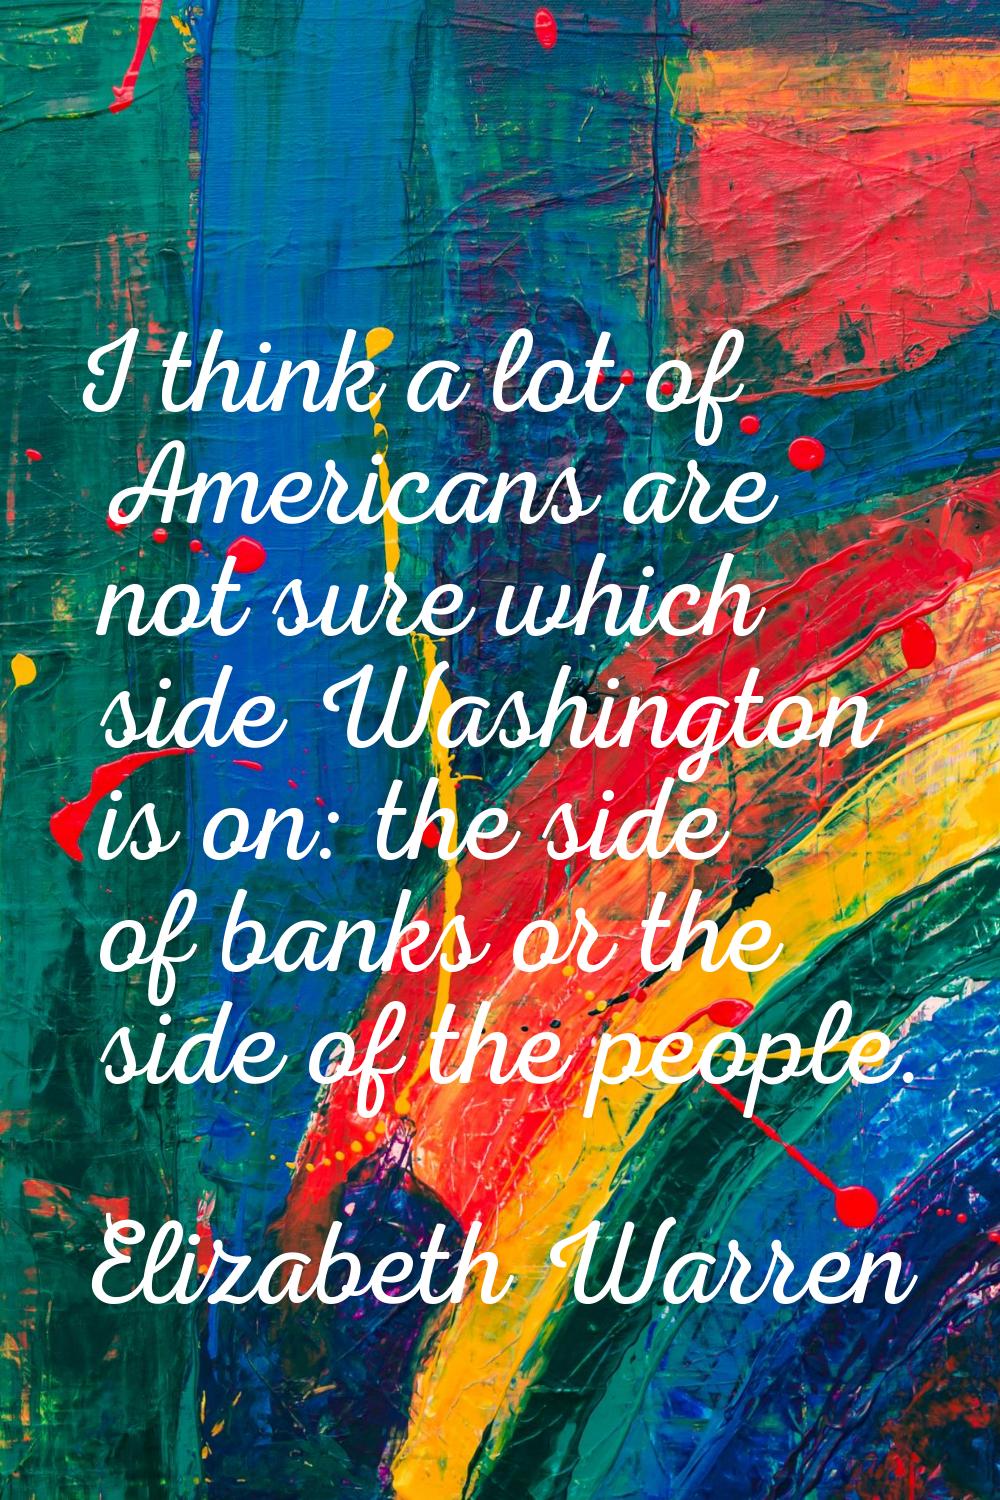 I think a lot of Americans are not sure which side Washington is on: the side of banks or the side 